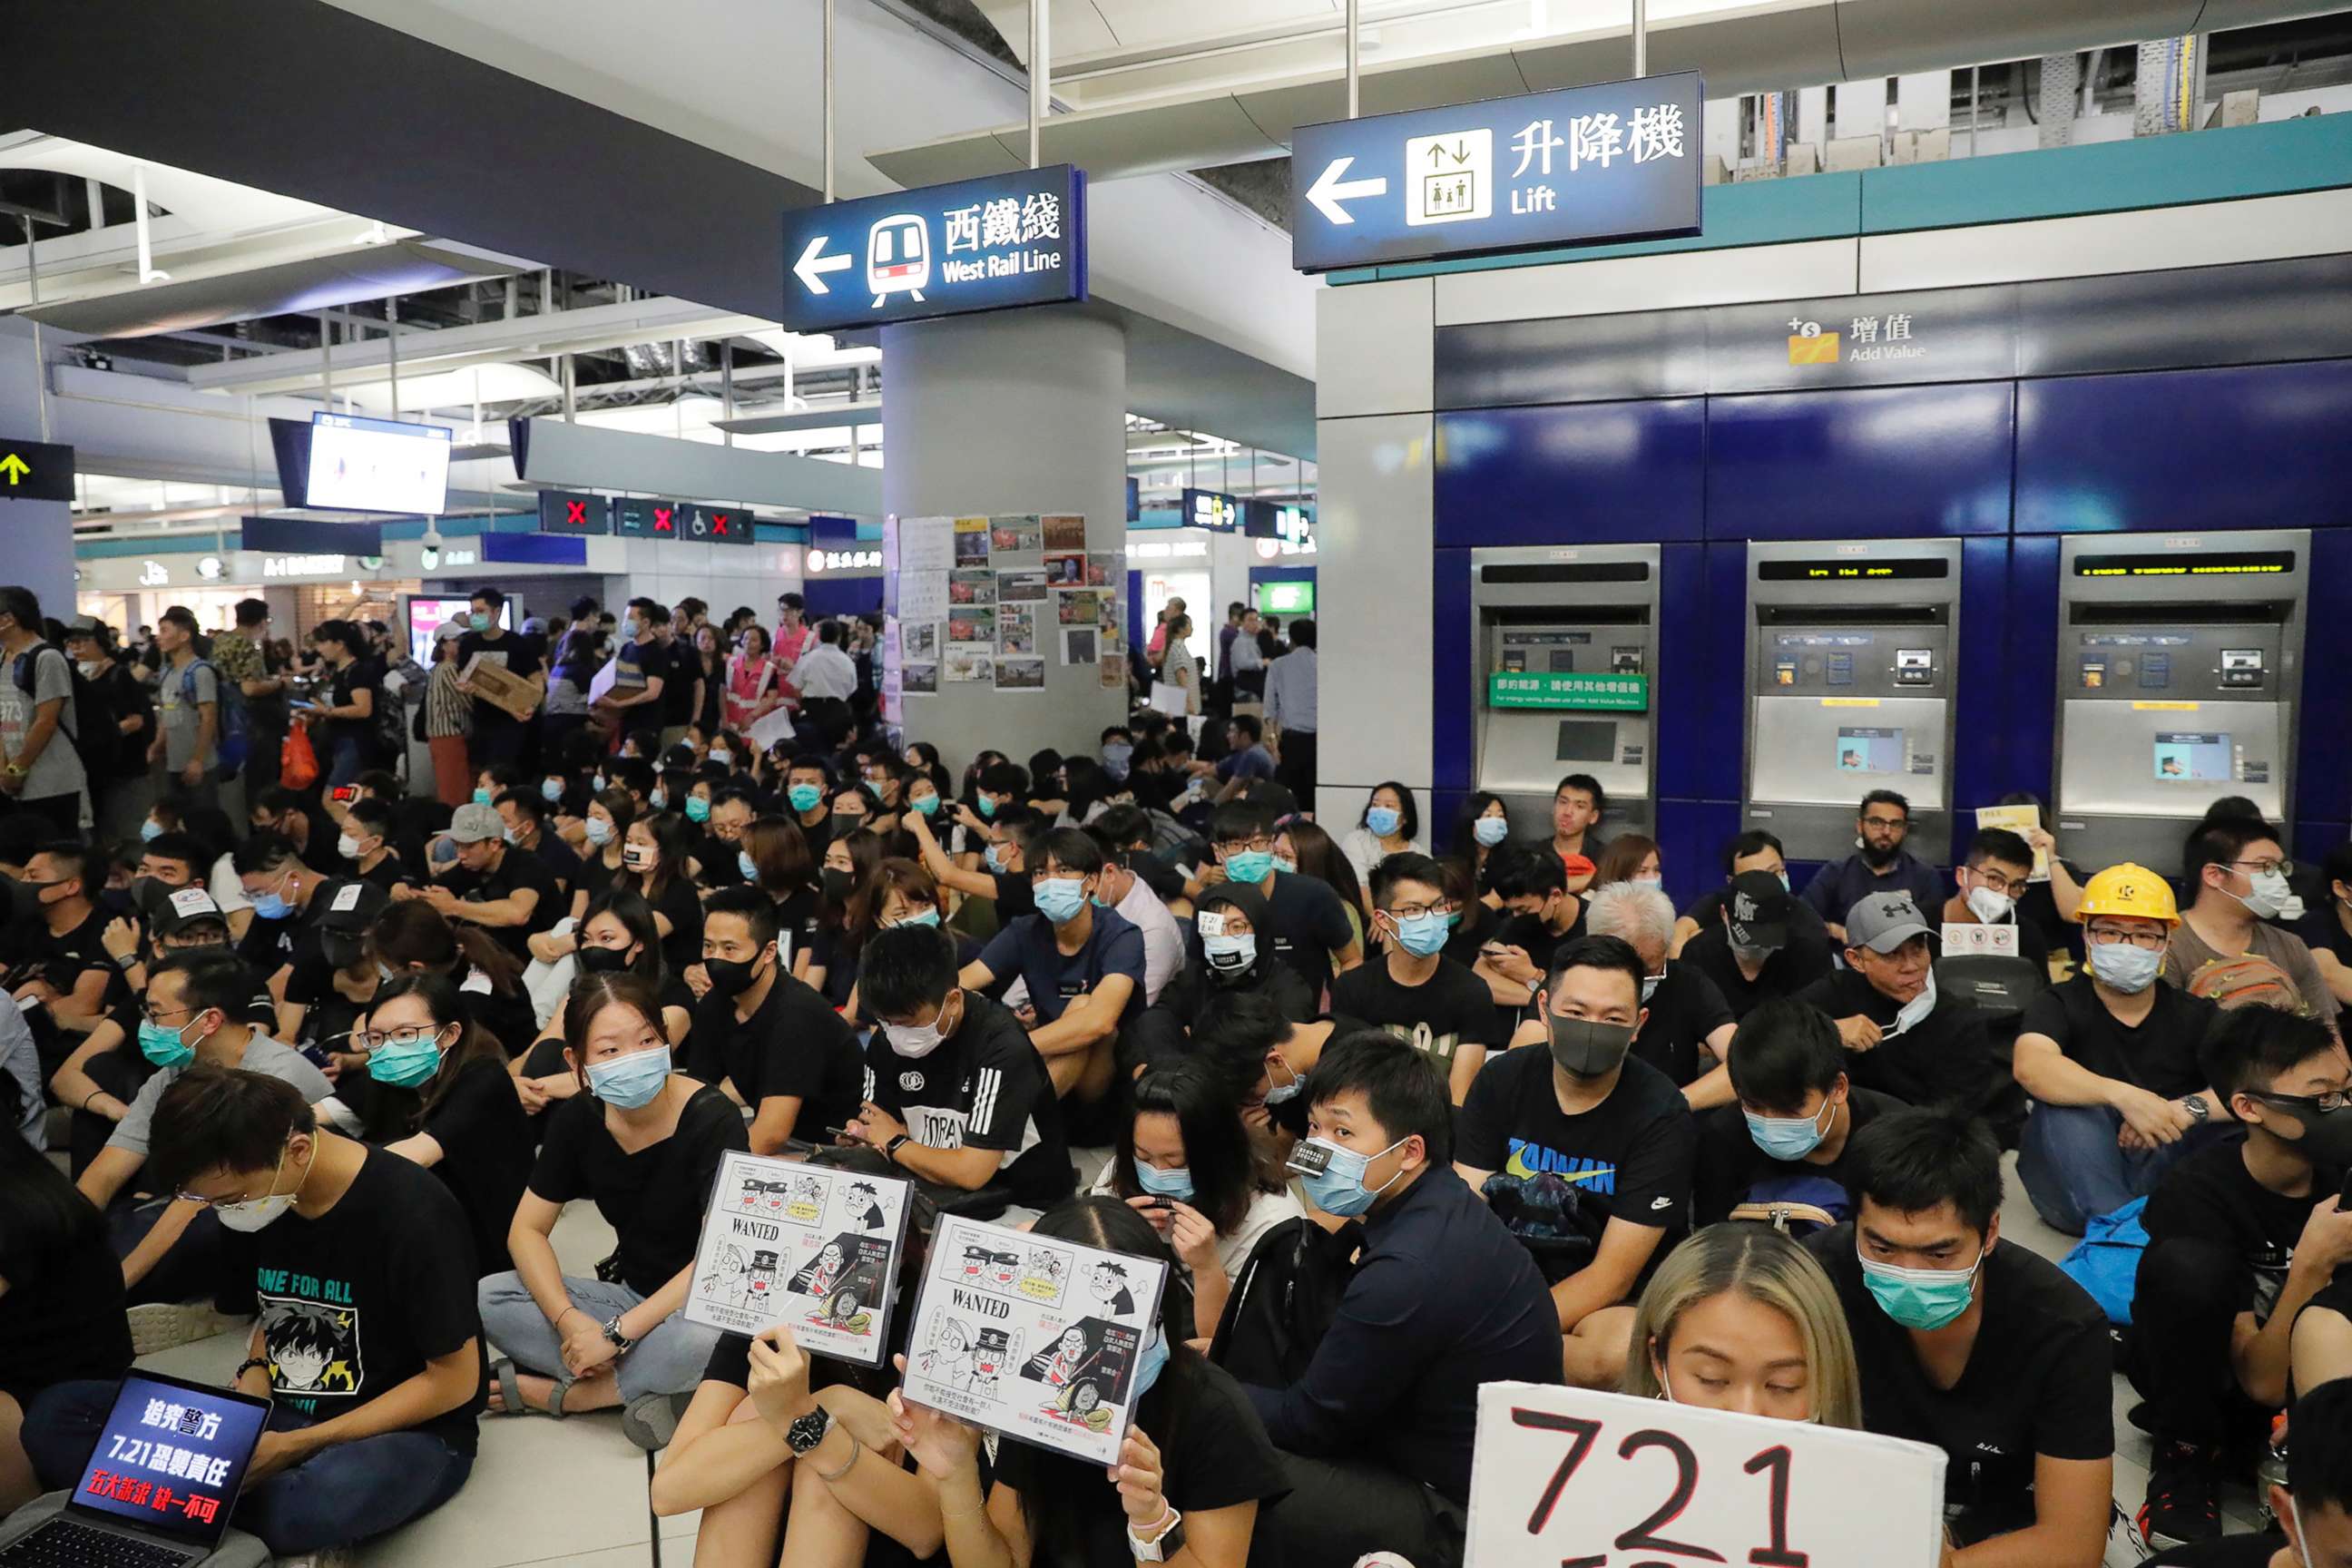 PHOTO: Demonstrators sit during a protest at the Yuen Long MTR station, where demonstrators and others were violently attacked by men in white T-shirts following an earlier protest in July, in Hong Kong, Aug. 21, 2019.